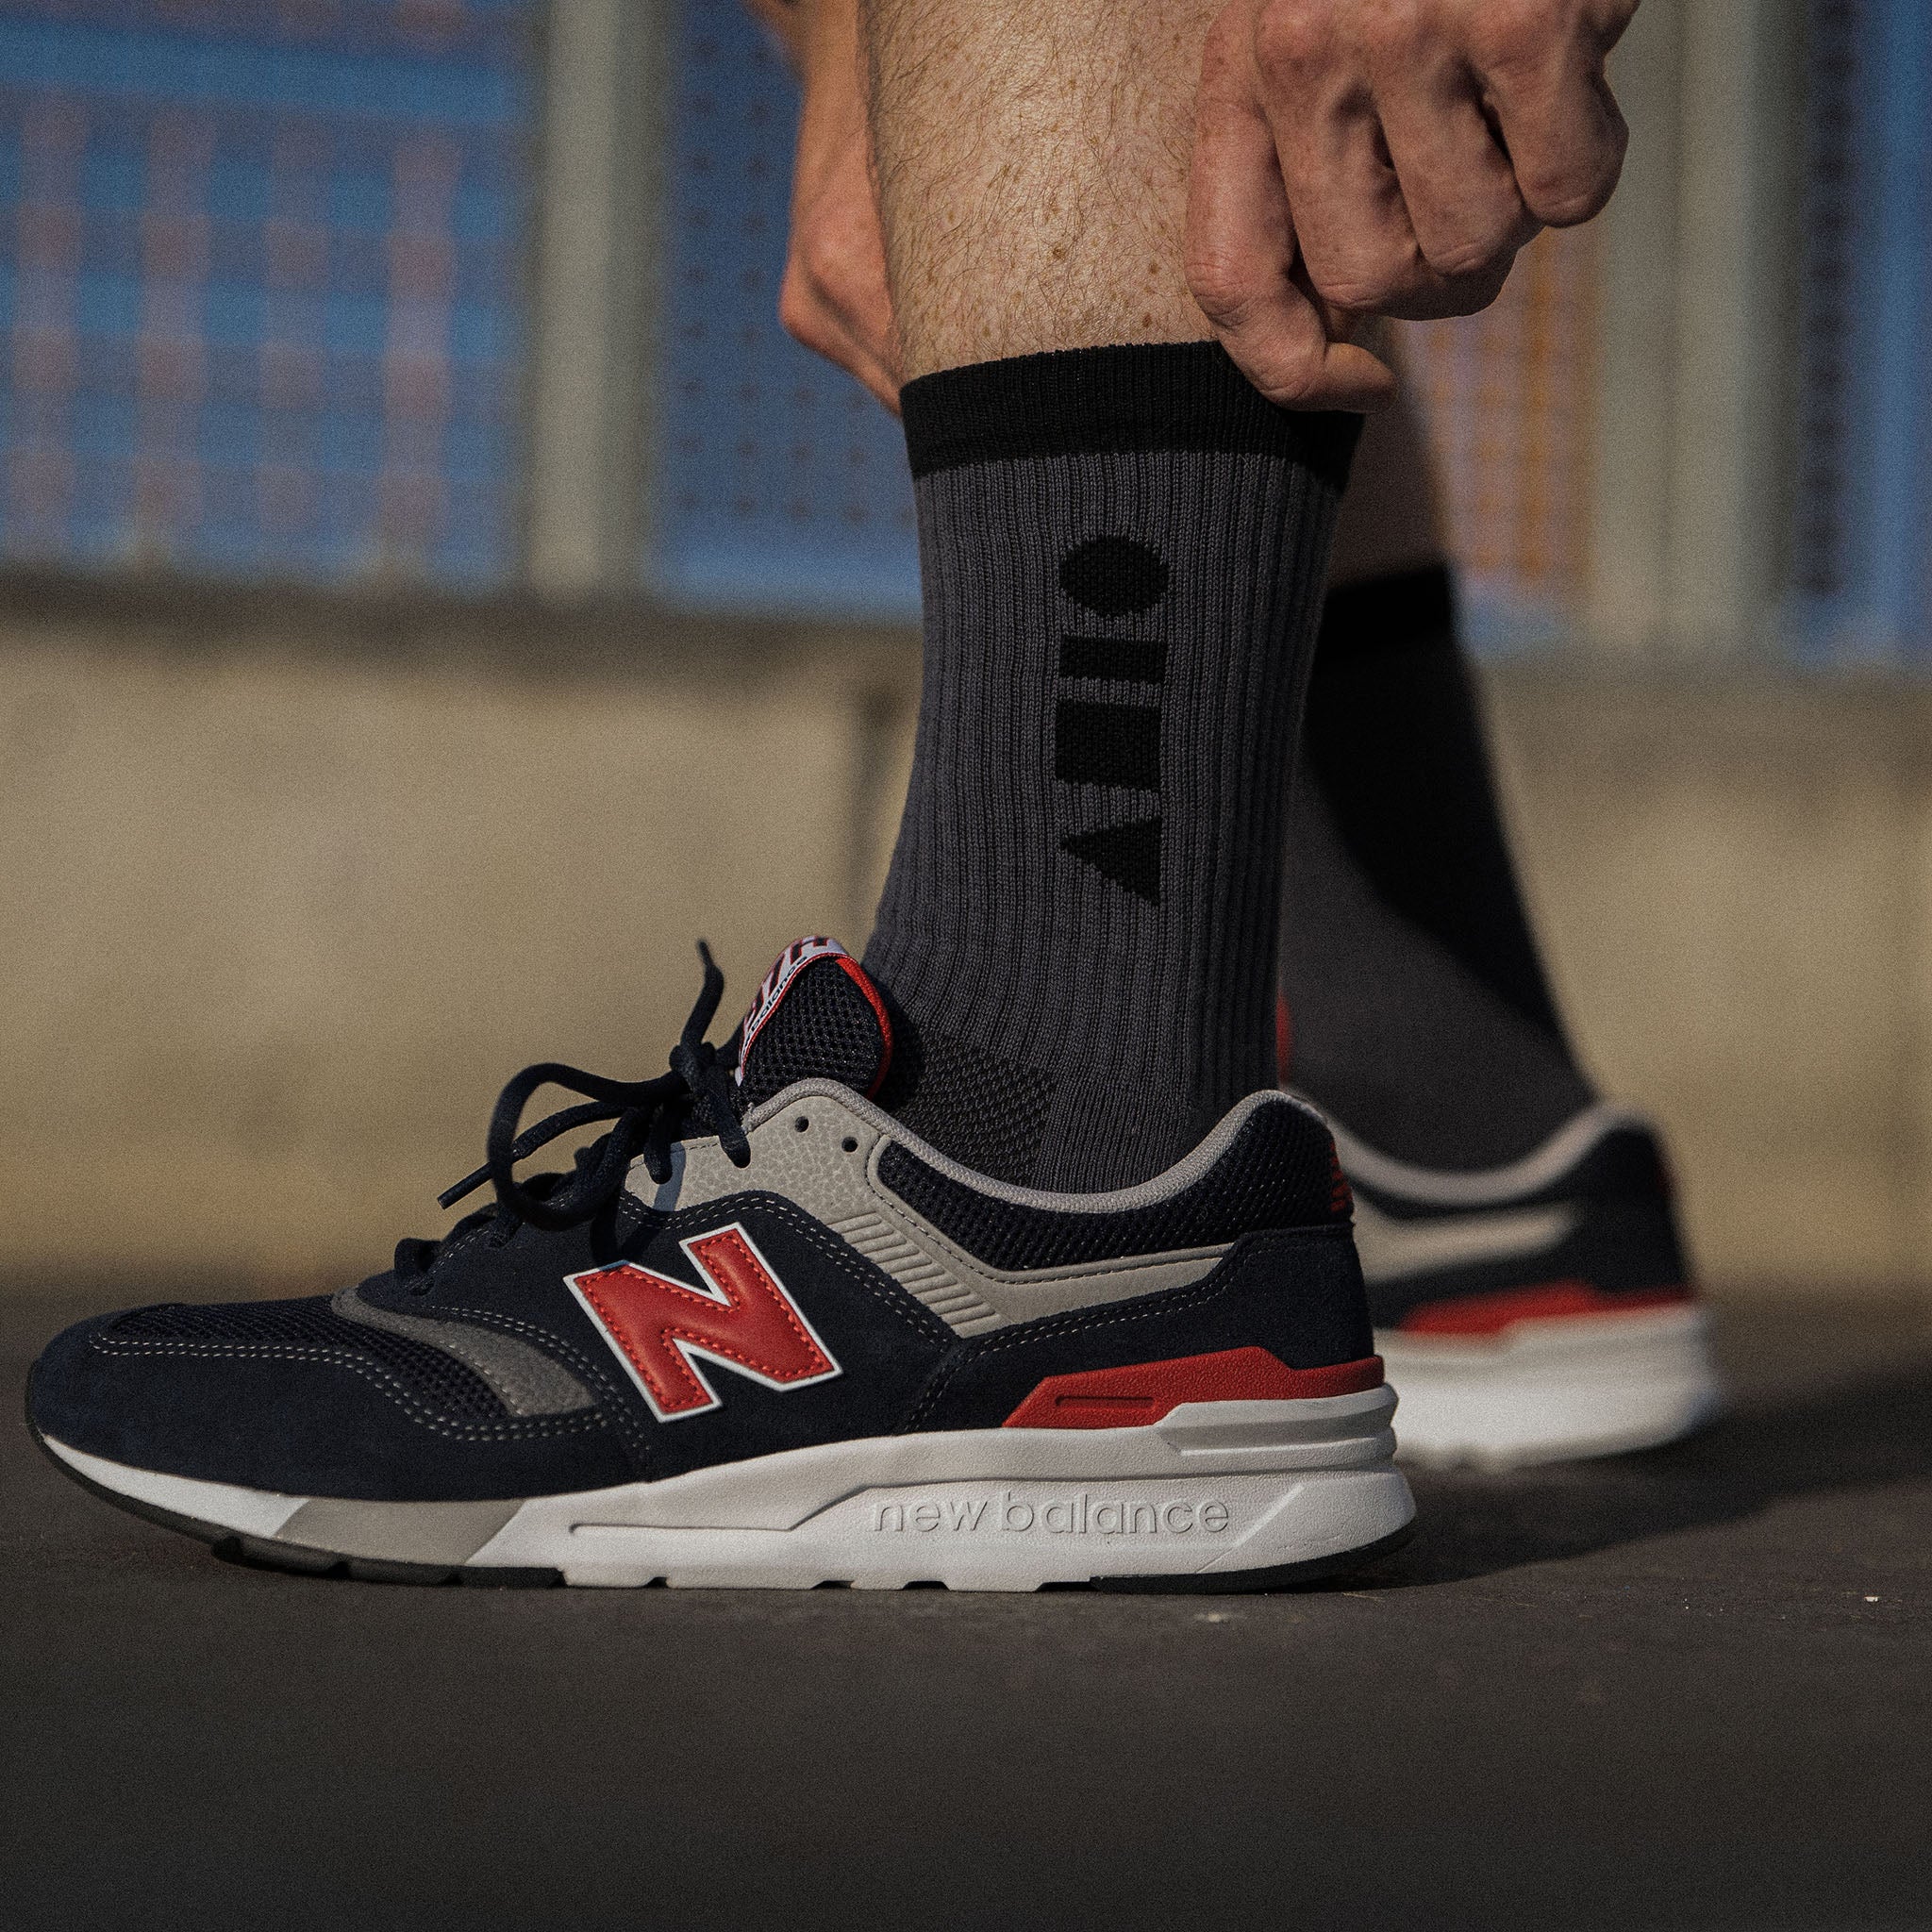 Clay Active's gunmetal grey sport sock with New Balance shoe. Training sock made in Australia, made for style and performance.